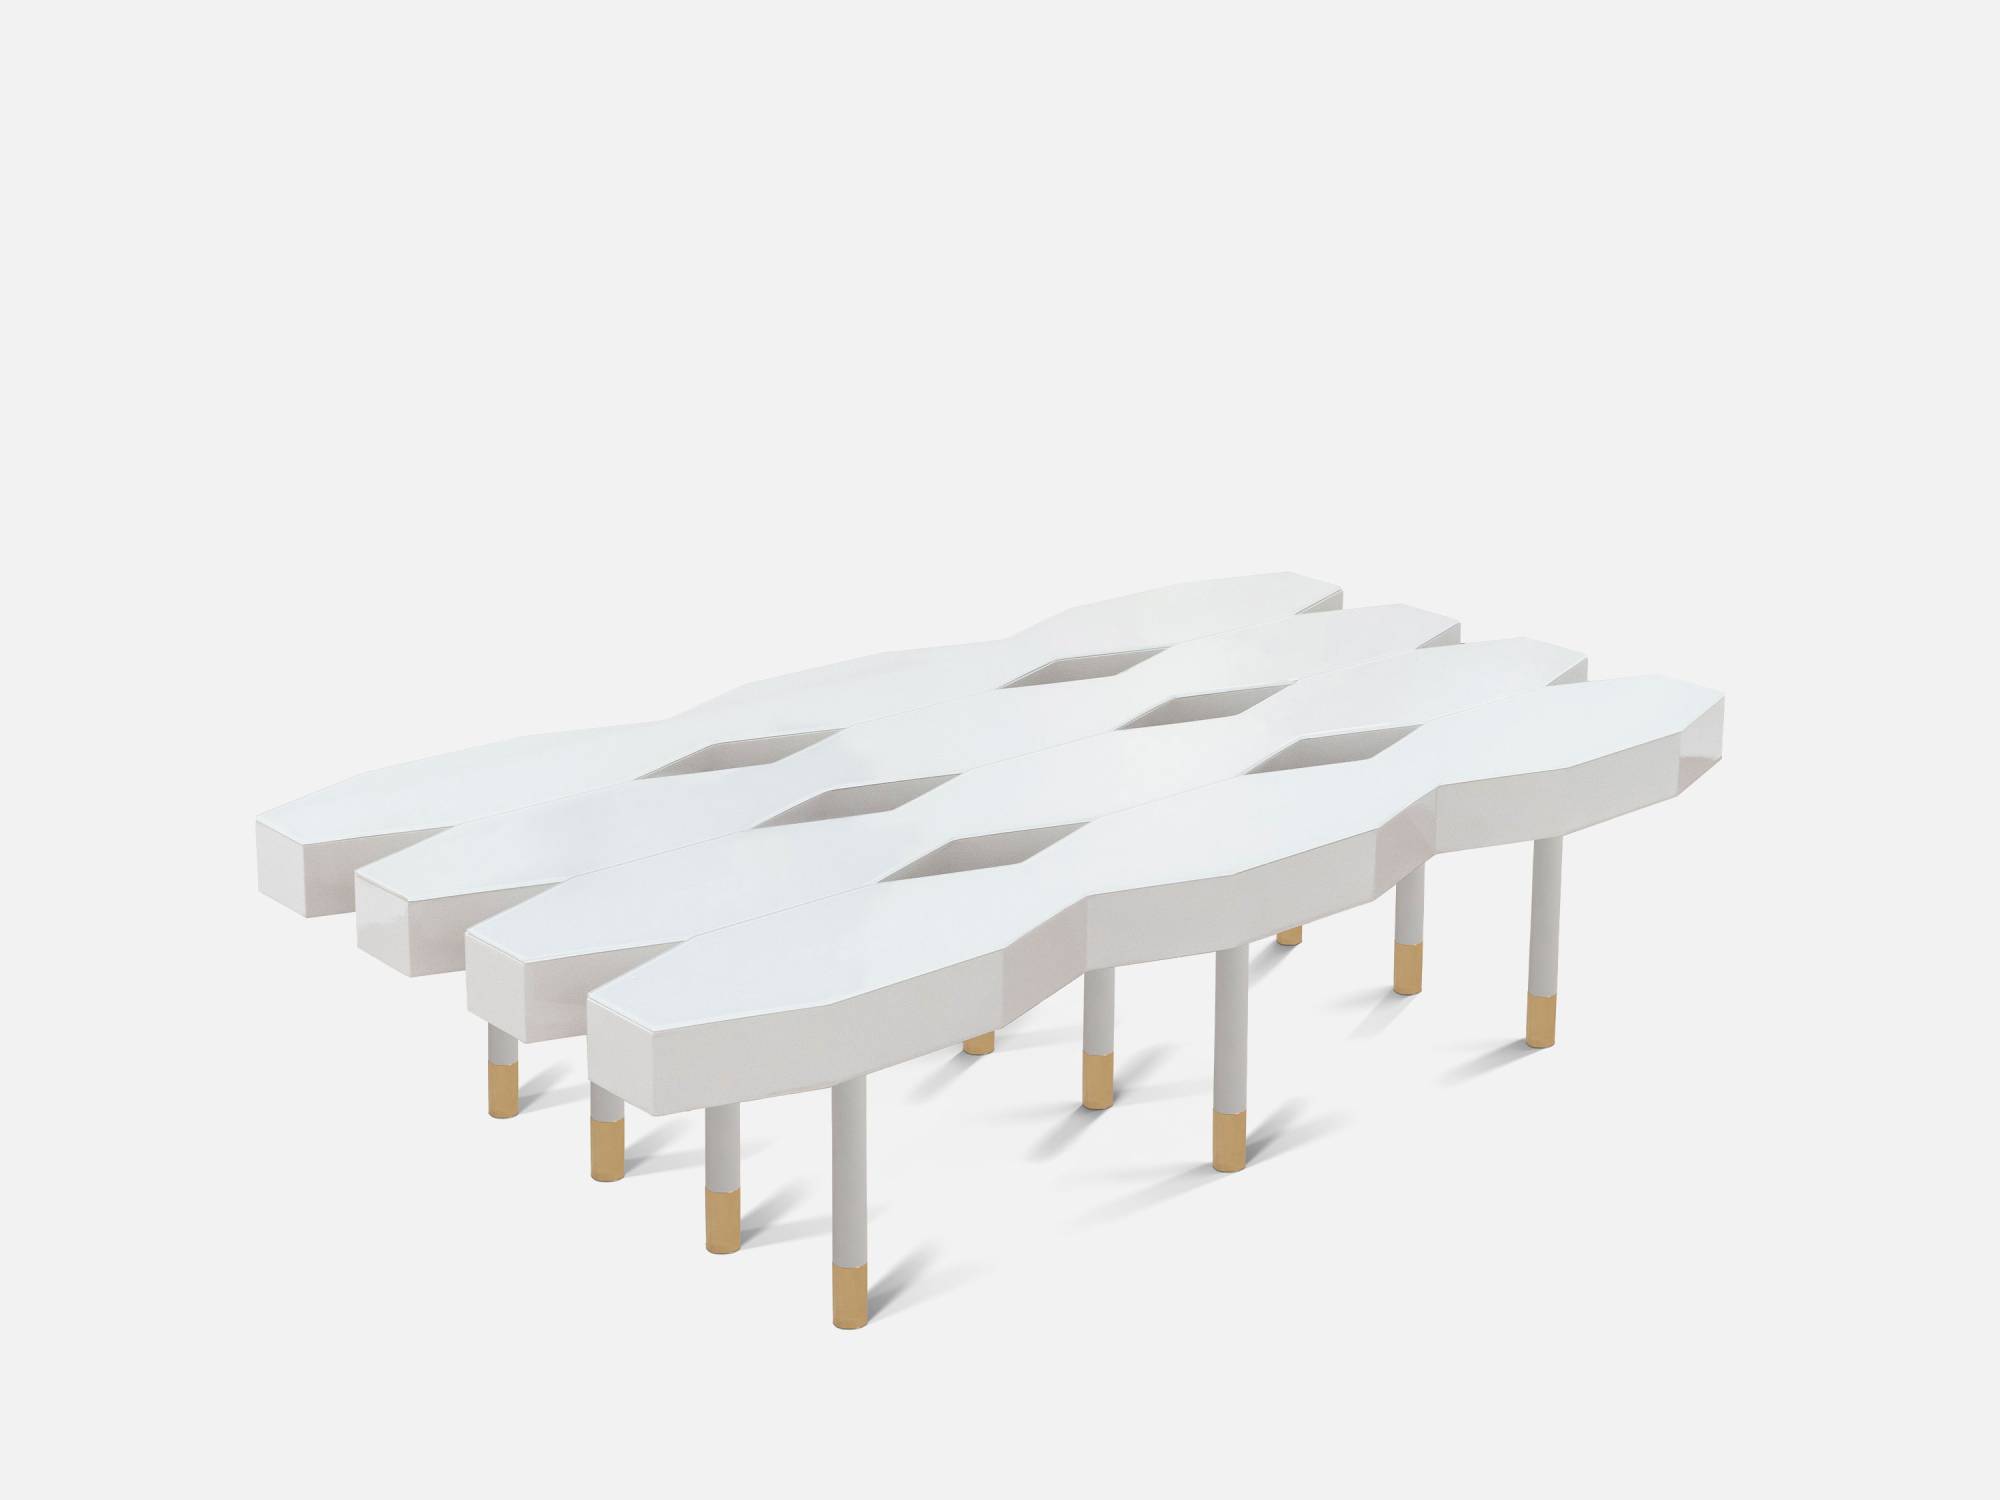 ART. 2280 - C.G. Capelletti quality furniture with made in Italy contemporary Small tables